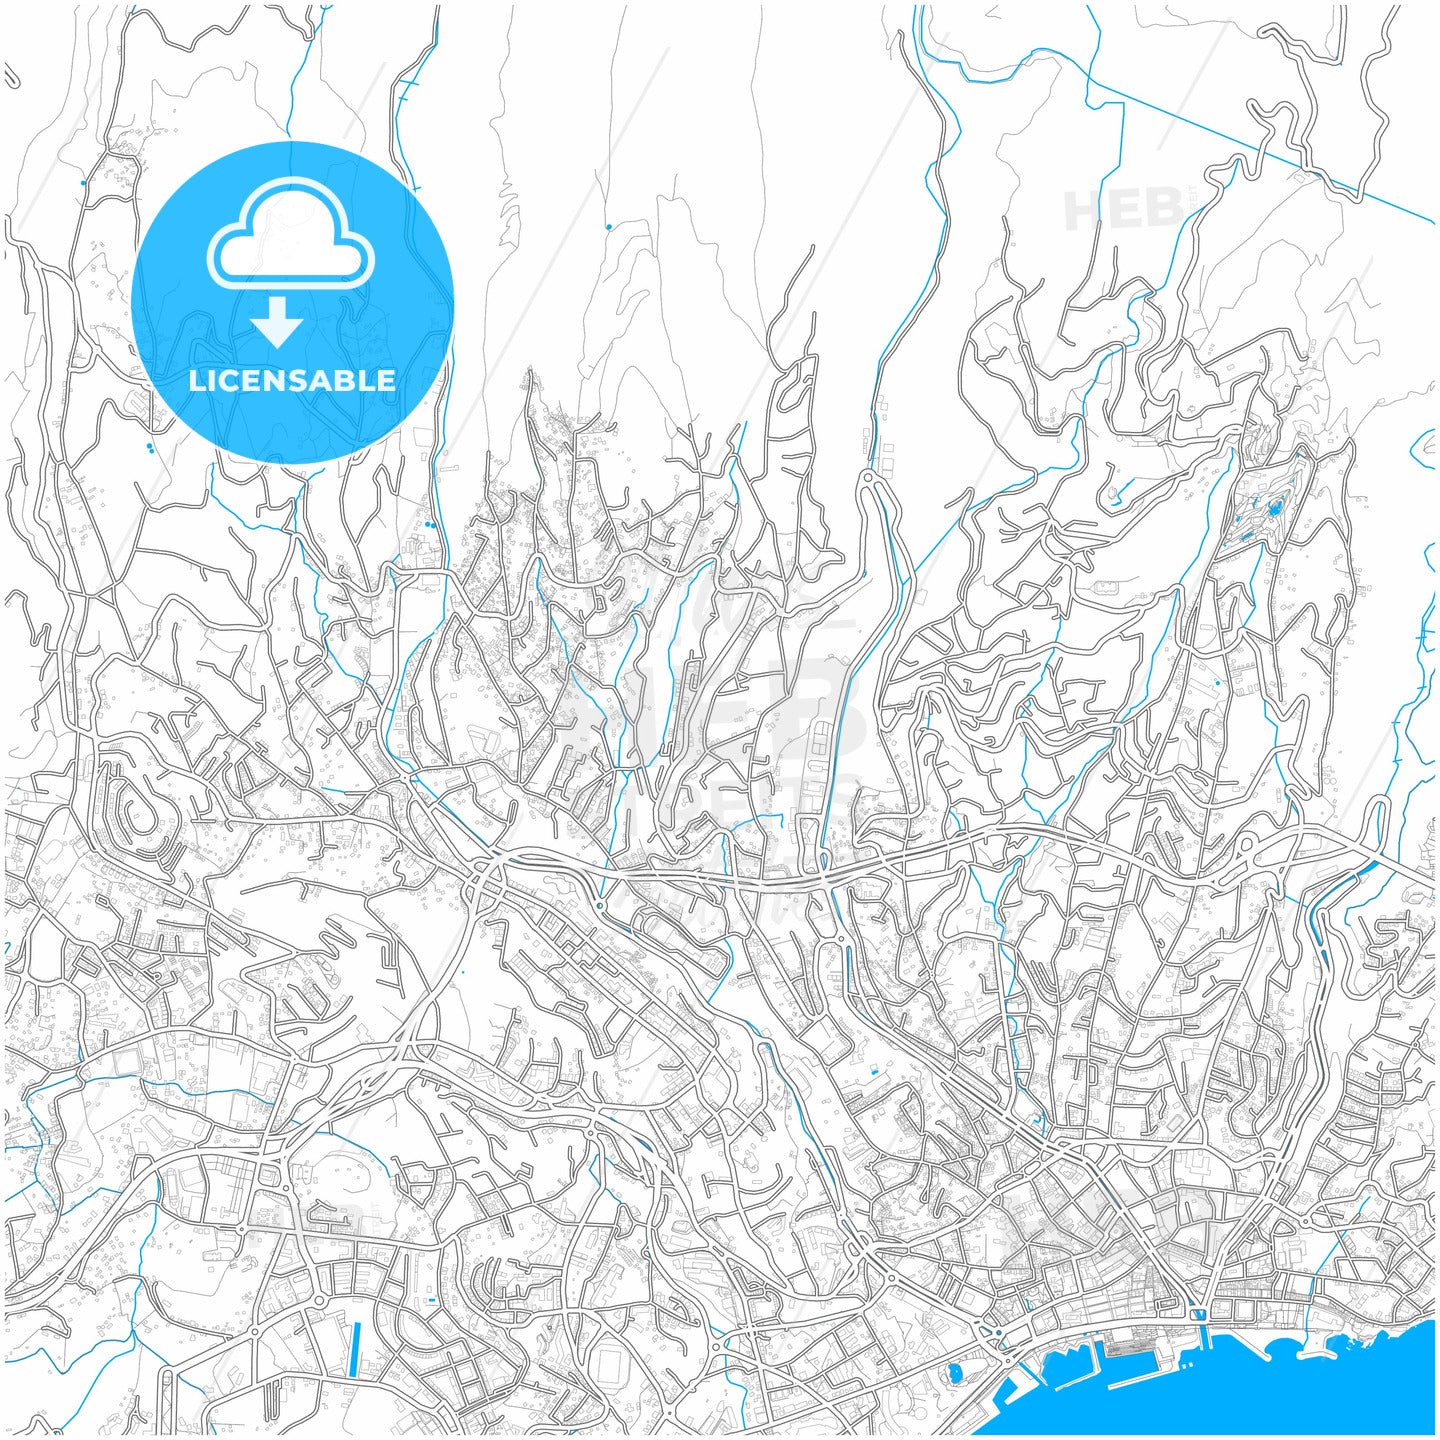 Detailed elevation map of Portugal with cities, Portugal